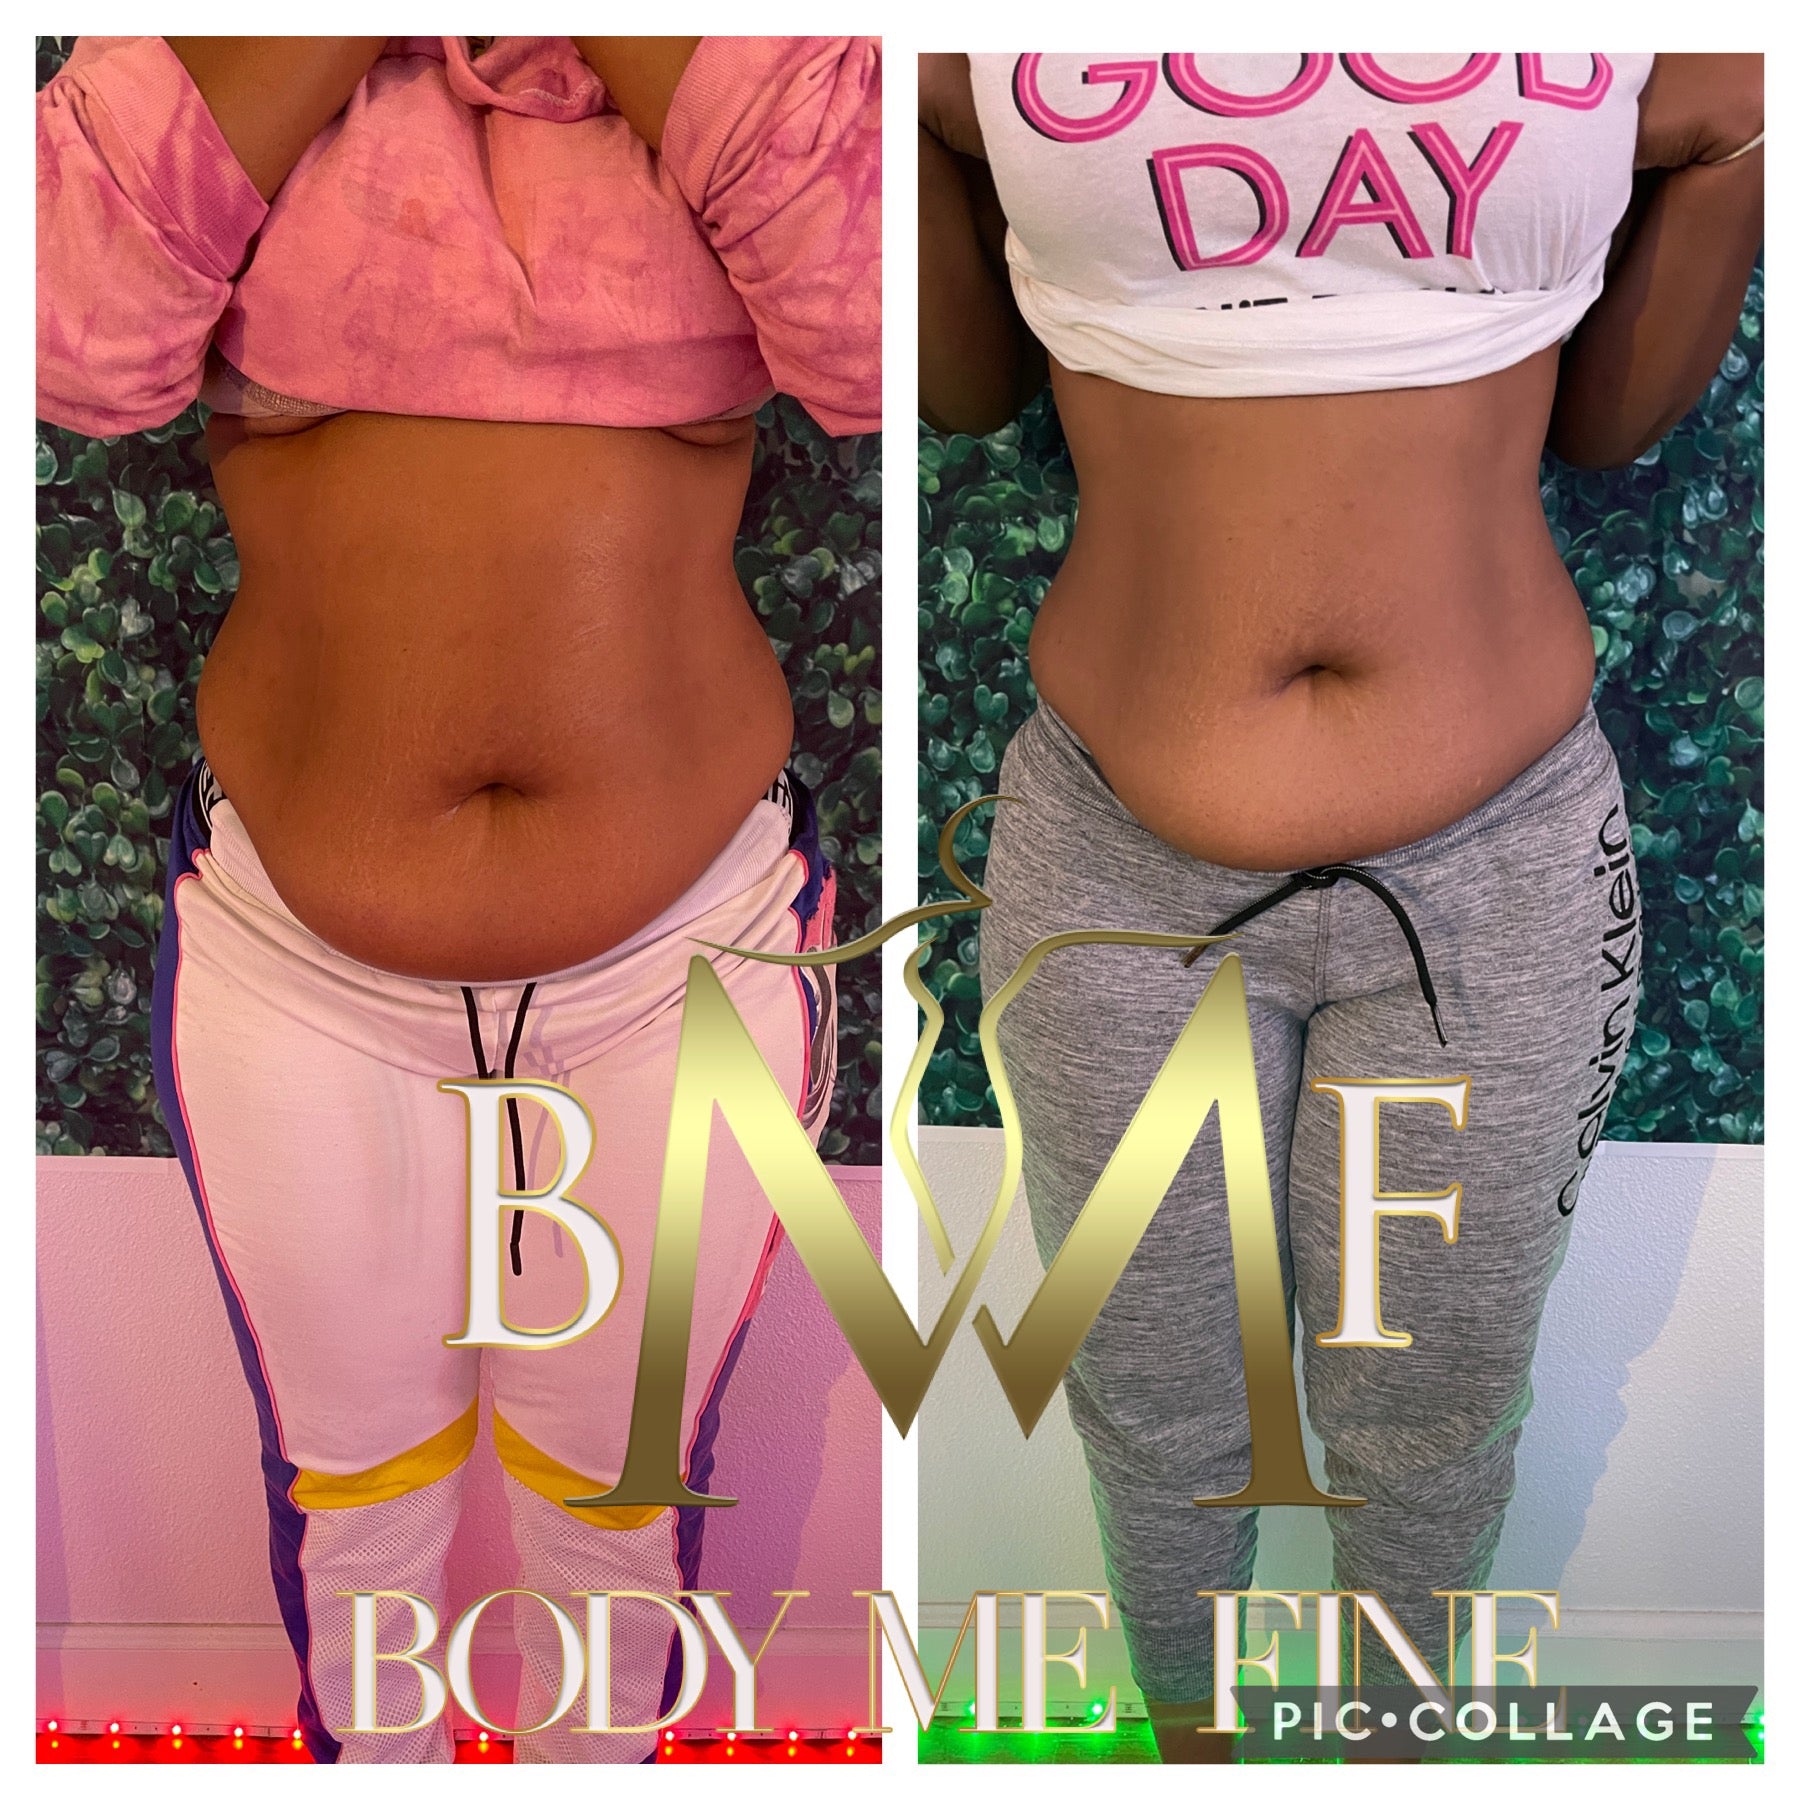 Body Contouring, Body Sculpting